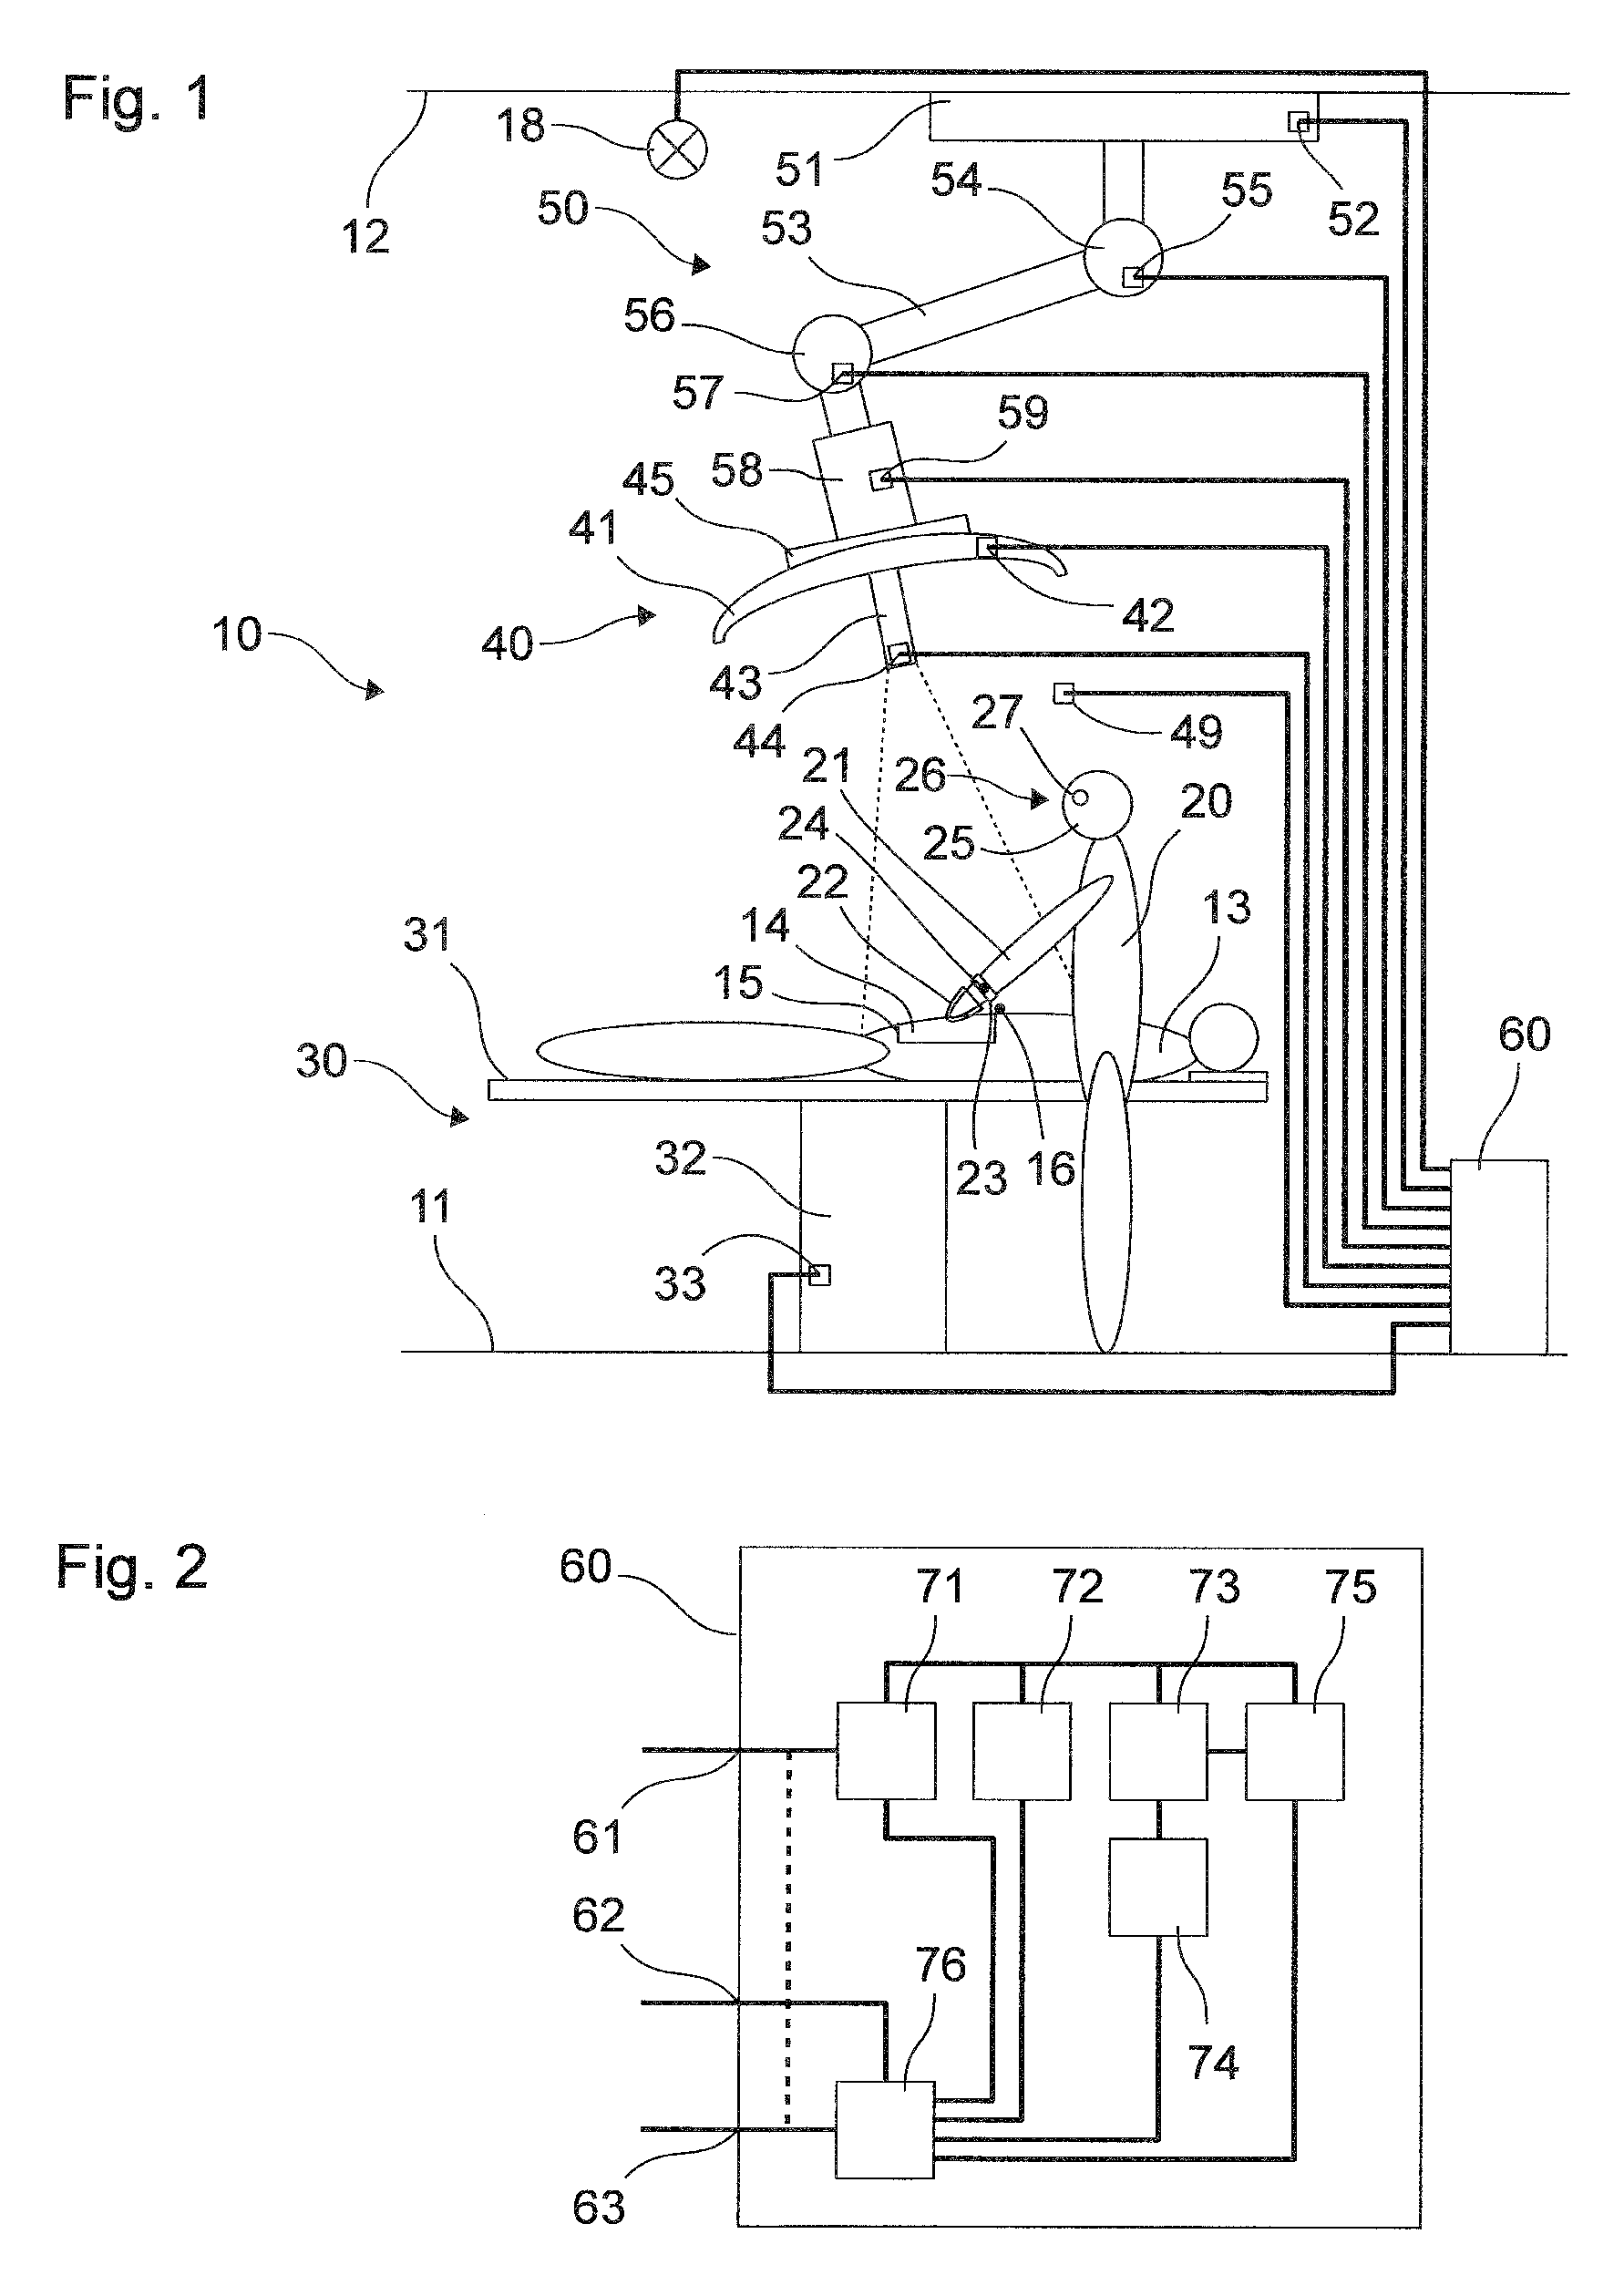 Control system and method to operate an operating room lamp